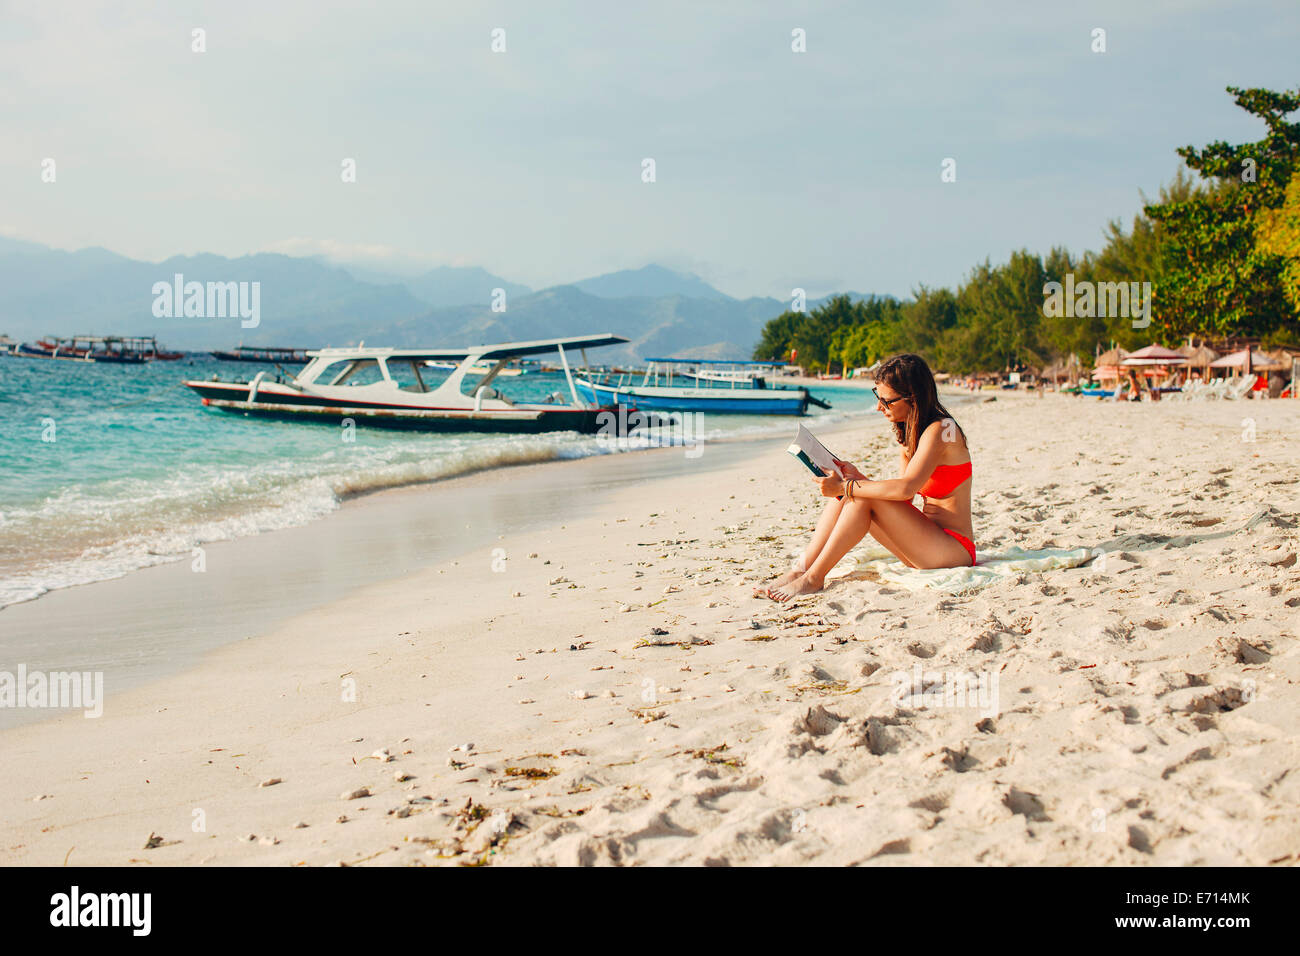 Indonesia, Gili Islands, woman reading a book on the beach Stock Photo